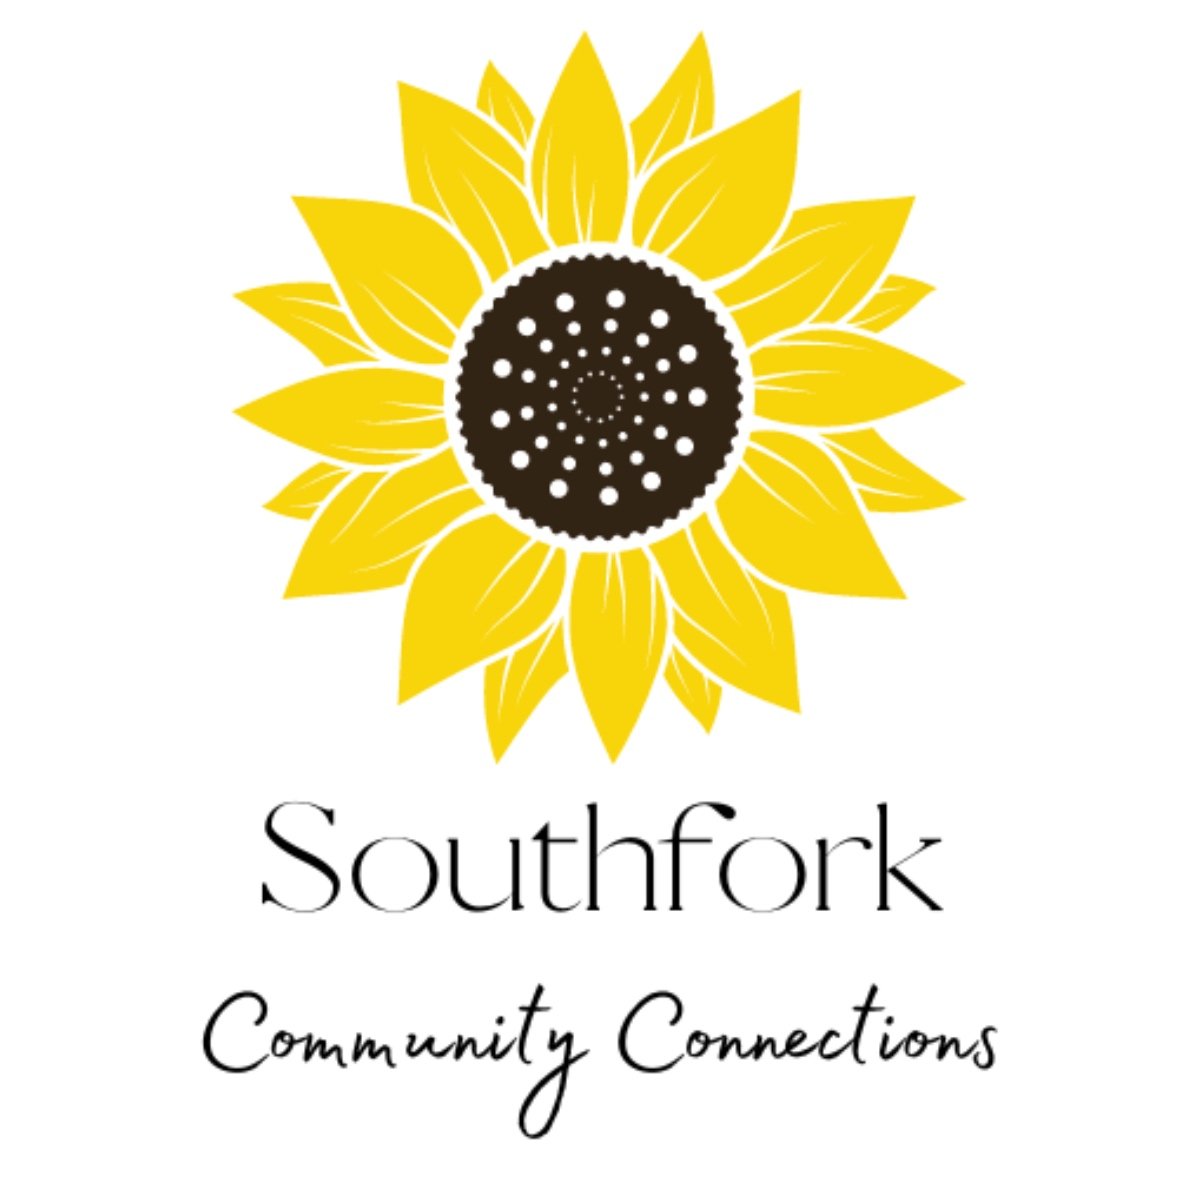 Southfork Community Connections Committee